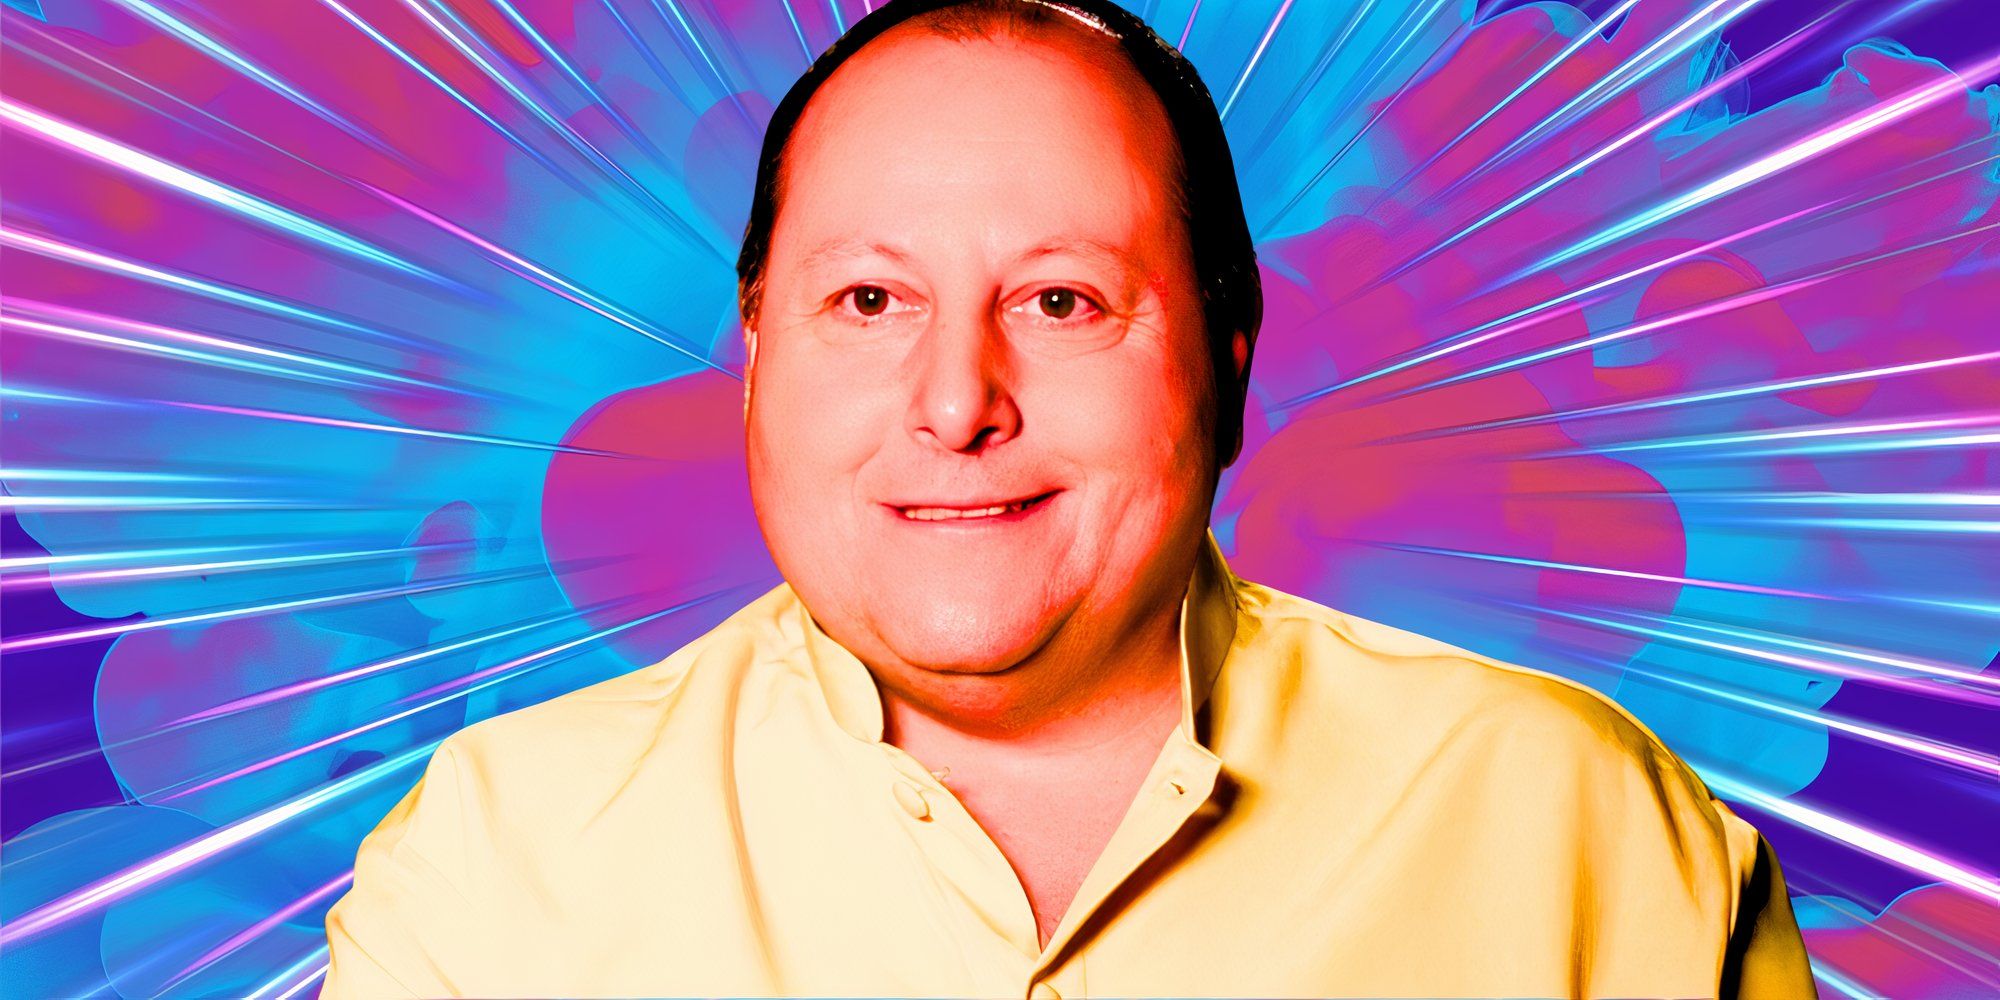 90 Day Fiancé David Toborowsky smiling in yellow shirt with lava lamp background in pink and blue